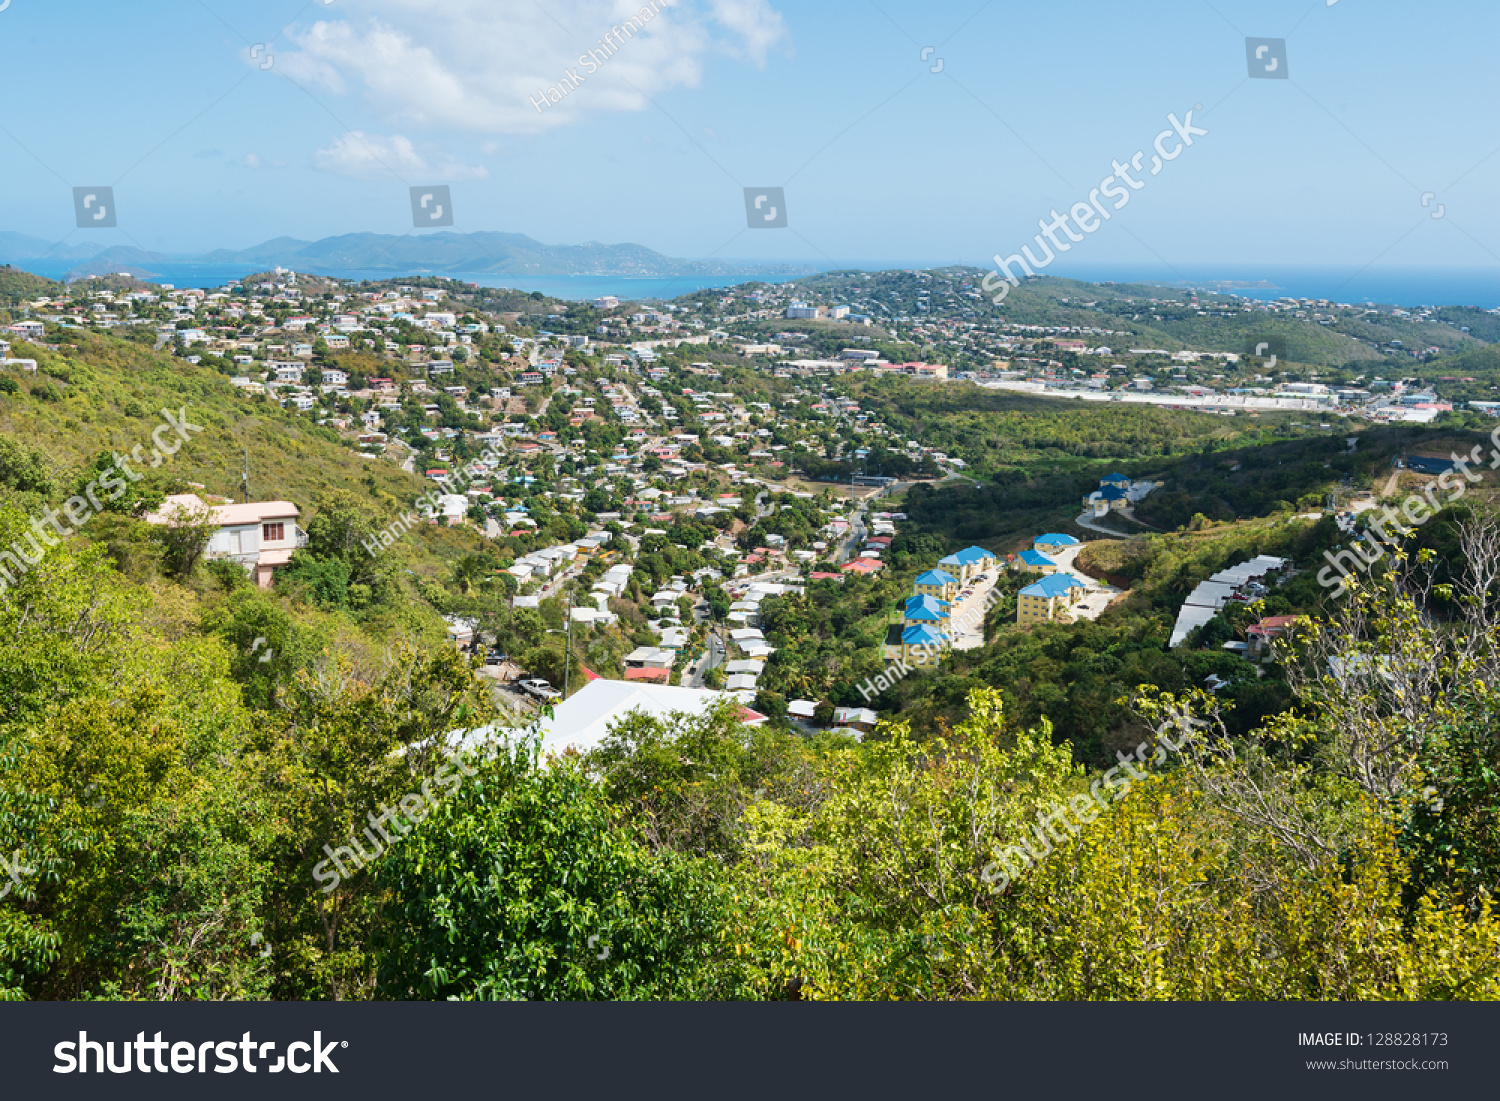 Looking out over St. Thomas, Virgin Islands #128828173